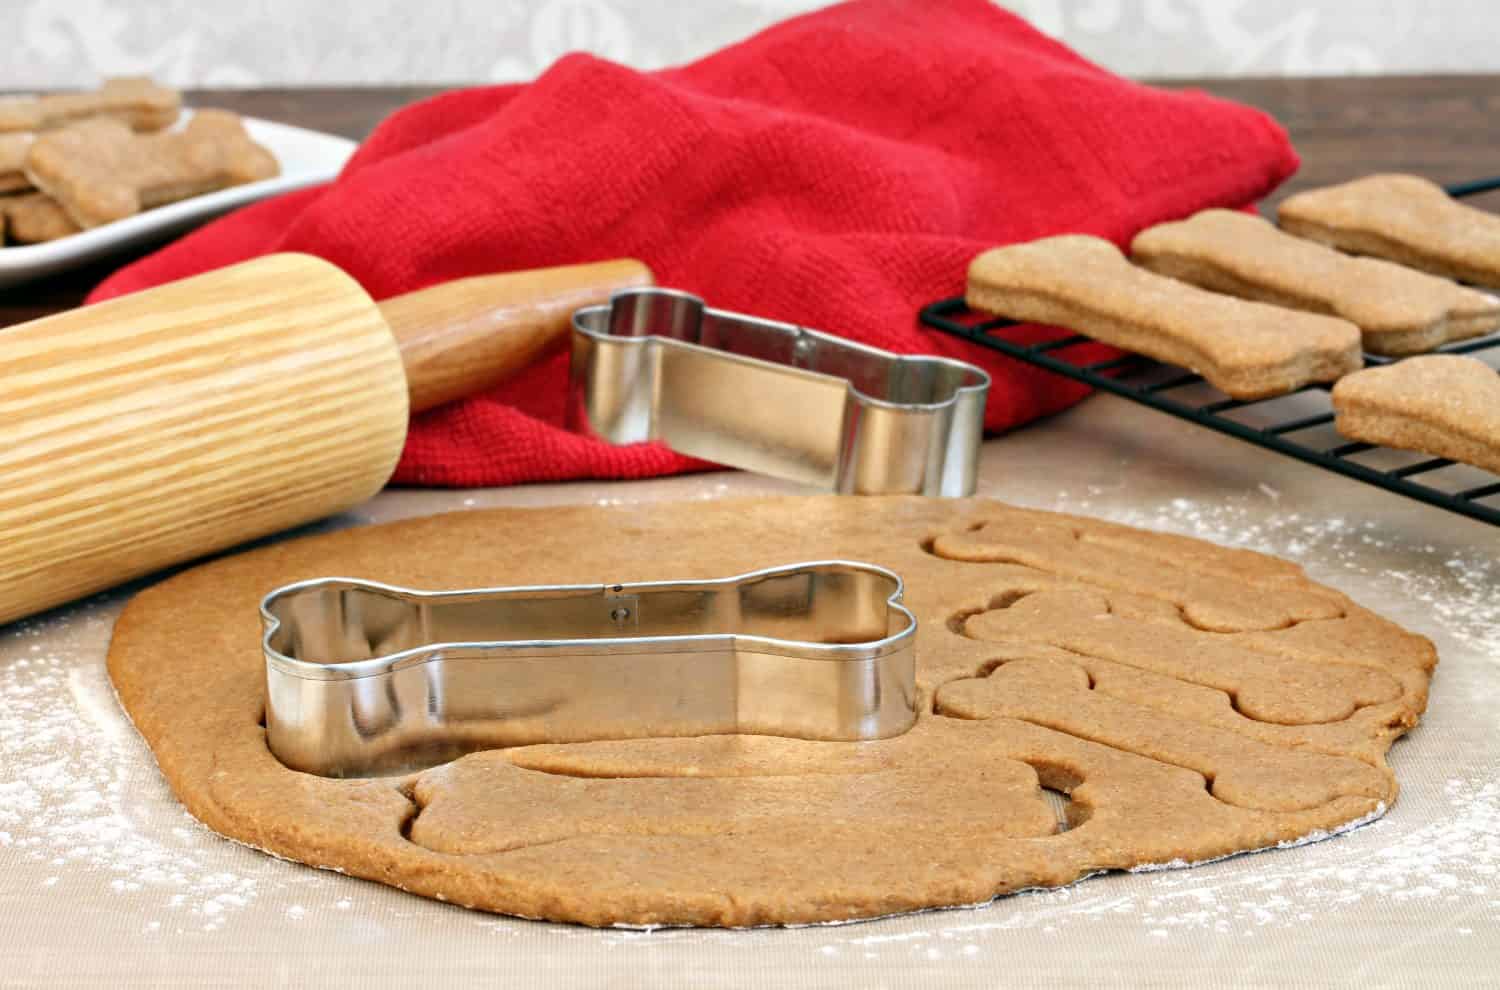 Peanut butter doggie biscuits are a holiday treat for your dog.